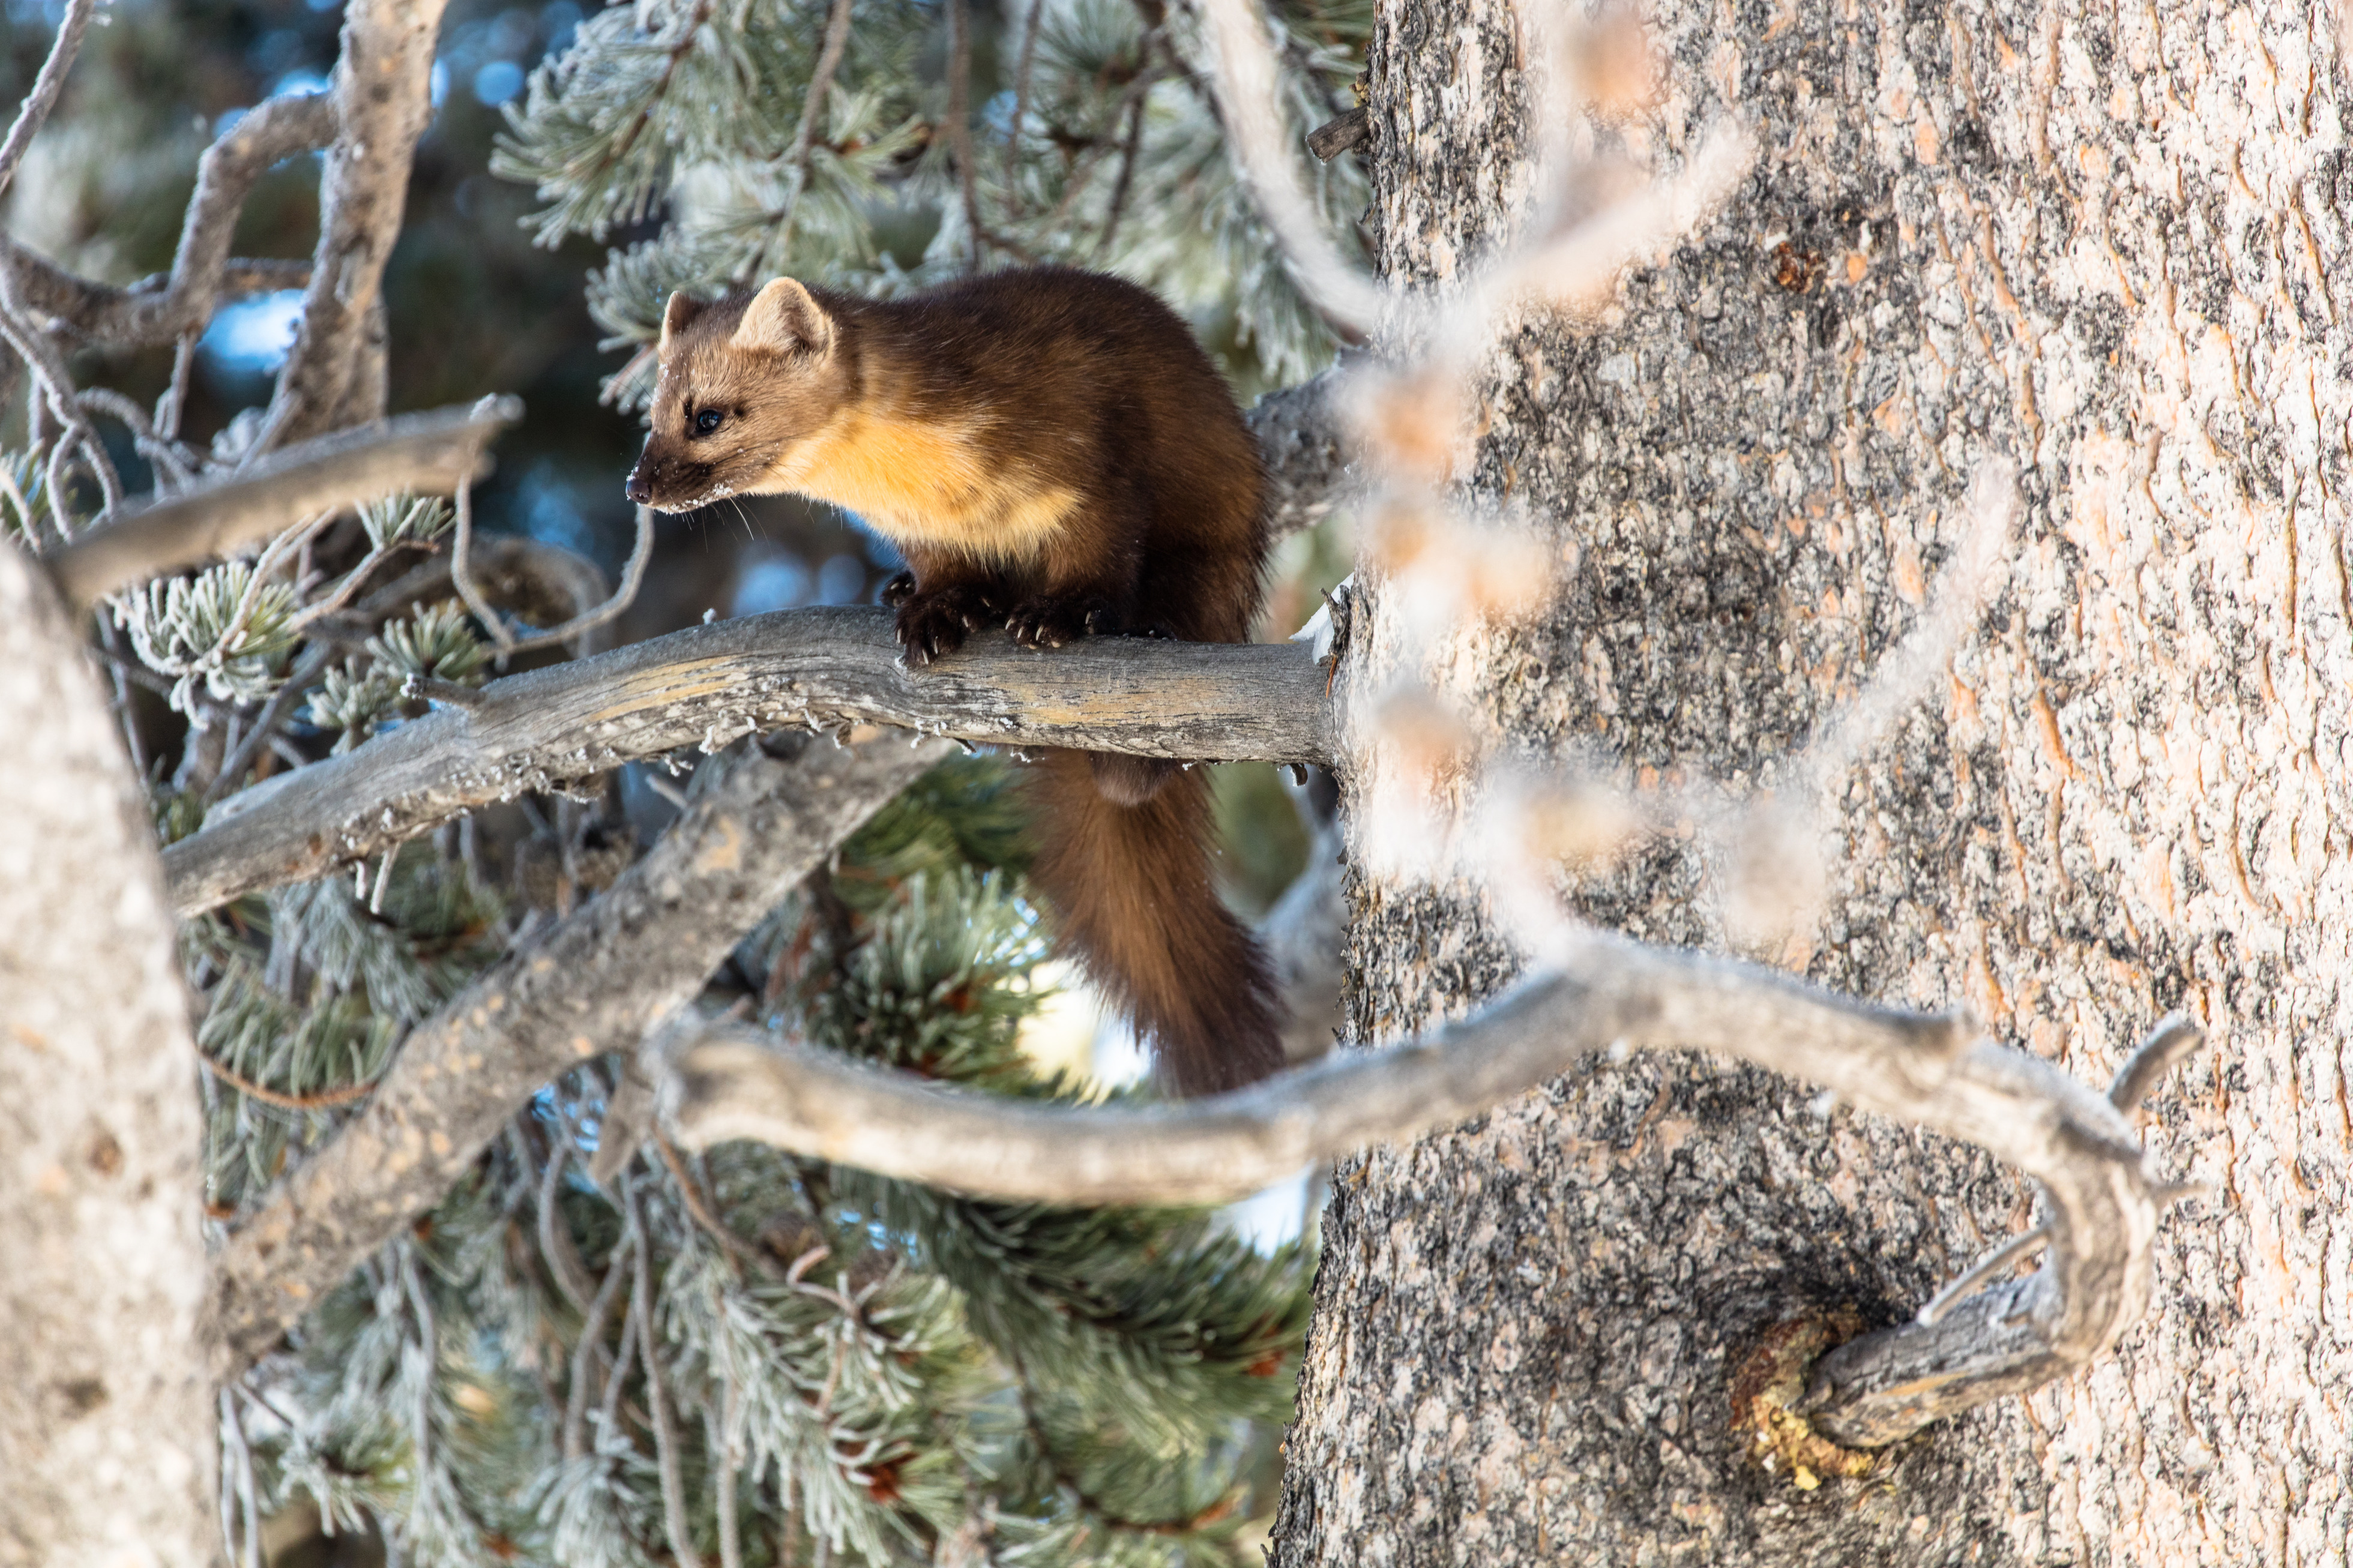 Marten is poised on all fours on a tree branch in a conifer.